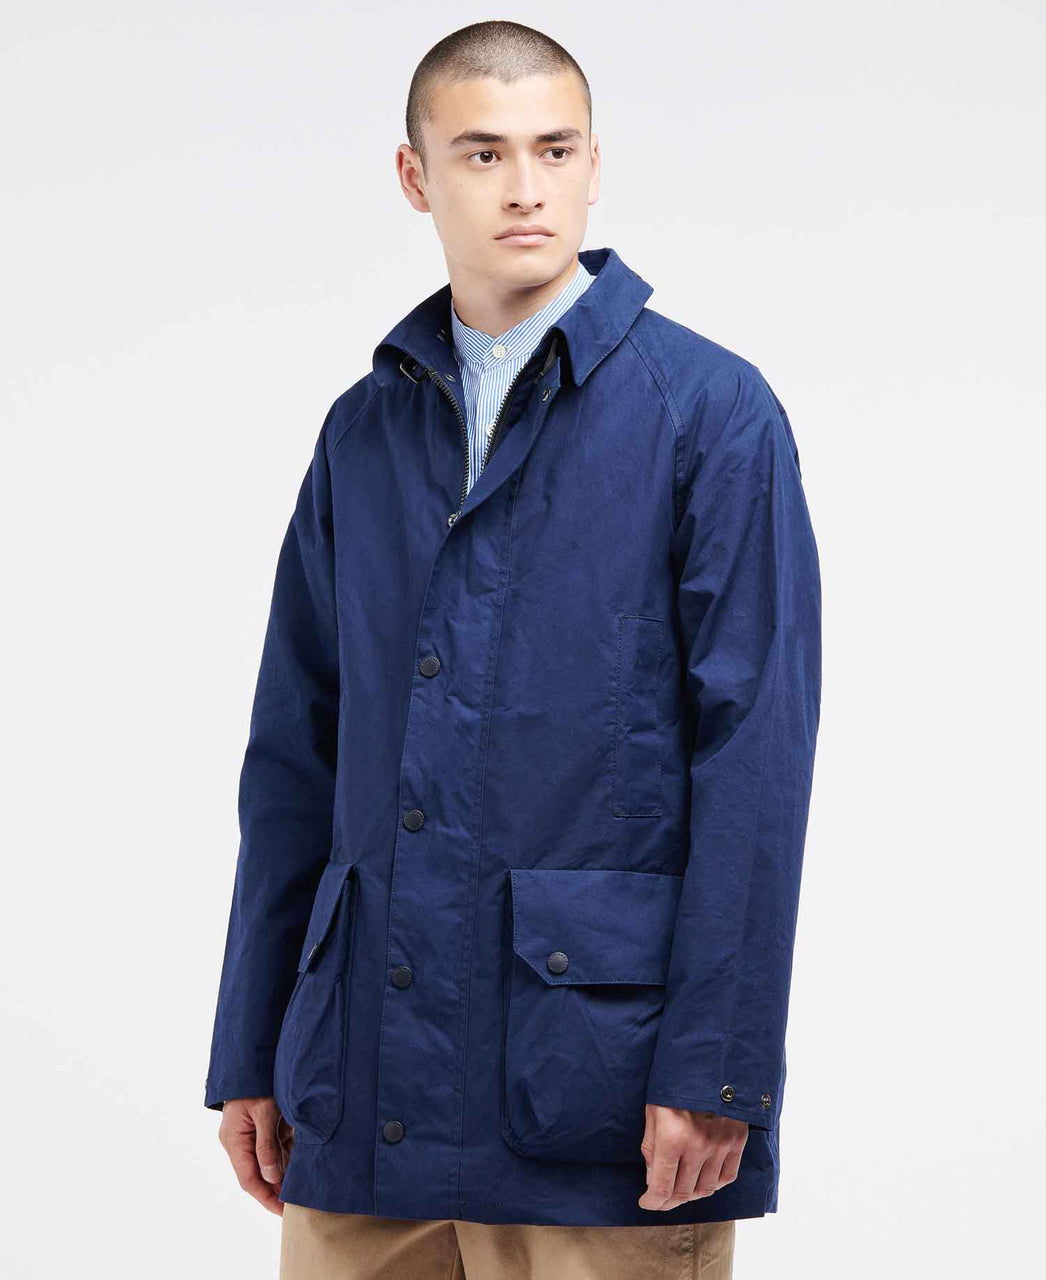 Ally Capellino x Barbour Back Casual Waxed Cotton Jacket in Navy